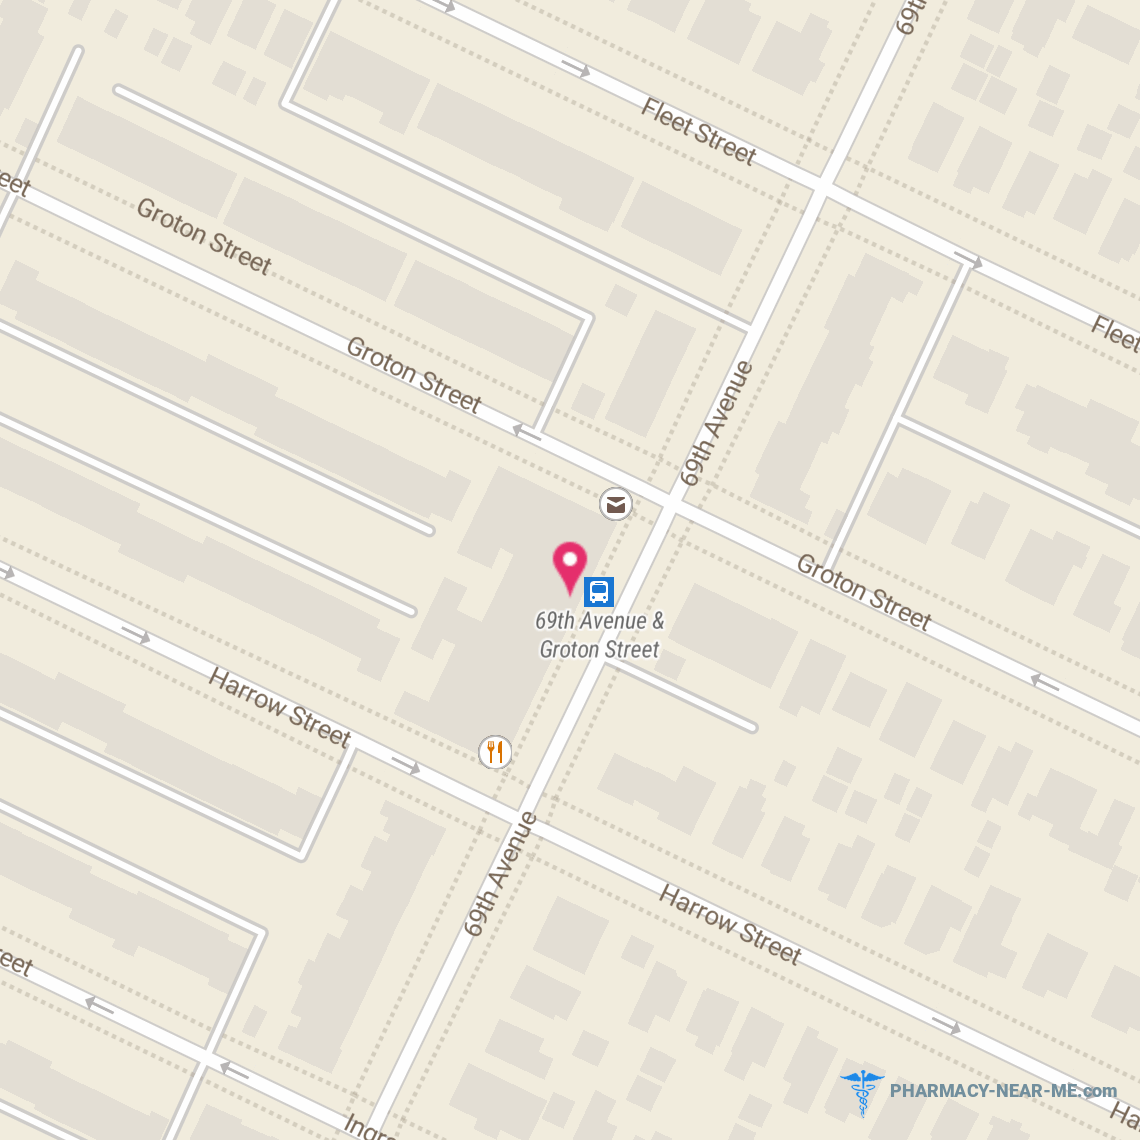 DOMA RX INC - Pharmacy Hours, Phone, Reviews & Information: 96-19 69th Avenue, Forest Hills, New York 11375, United States